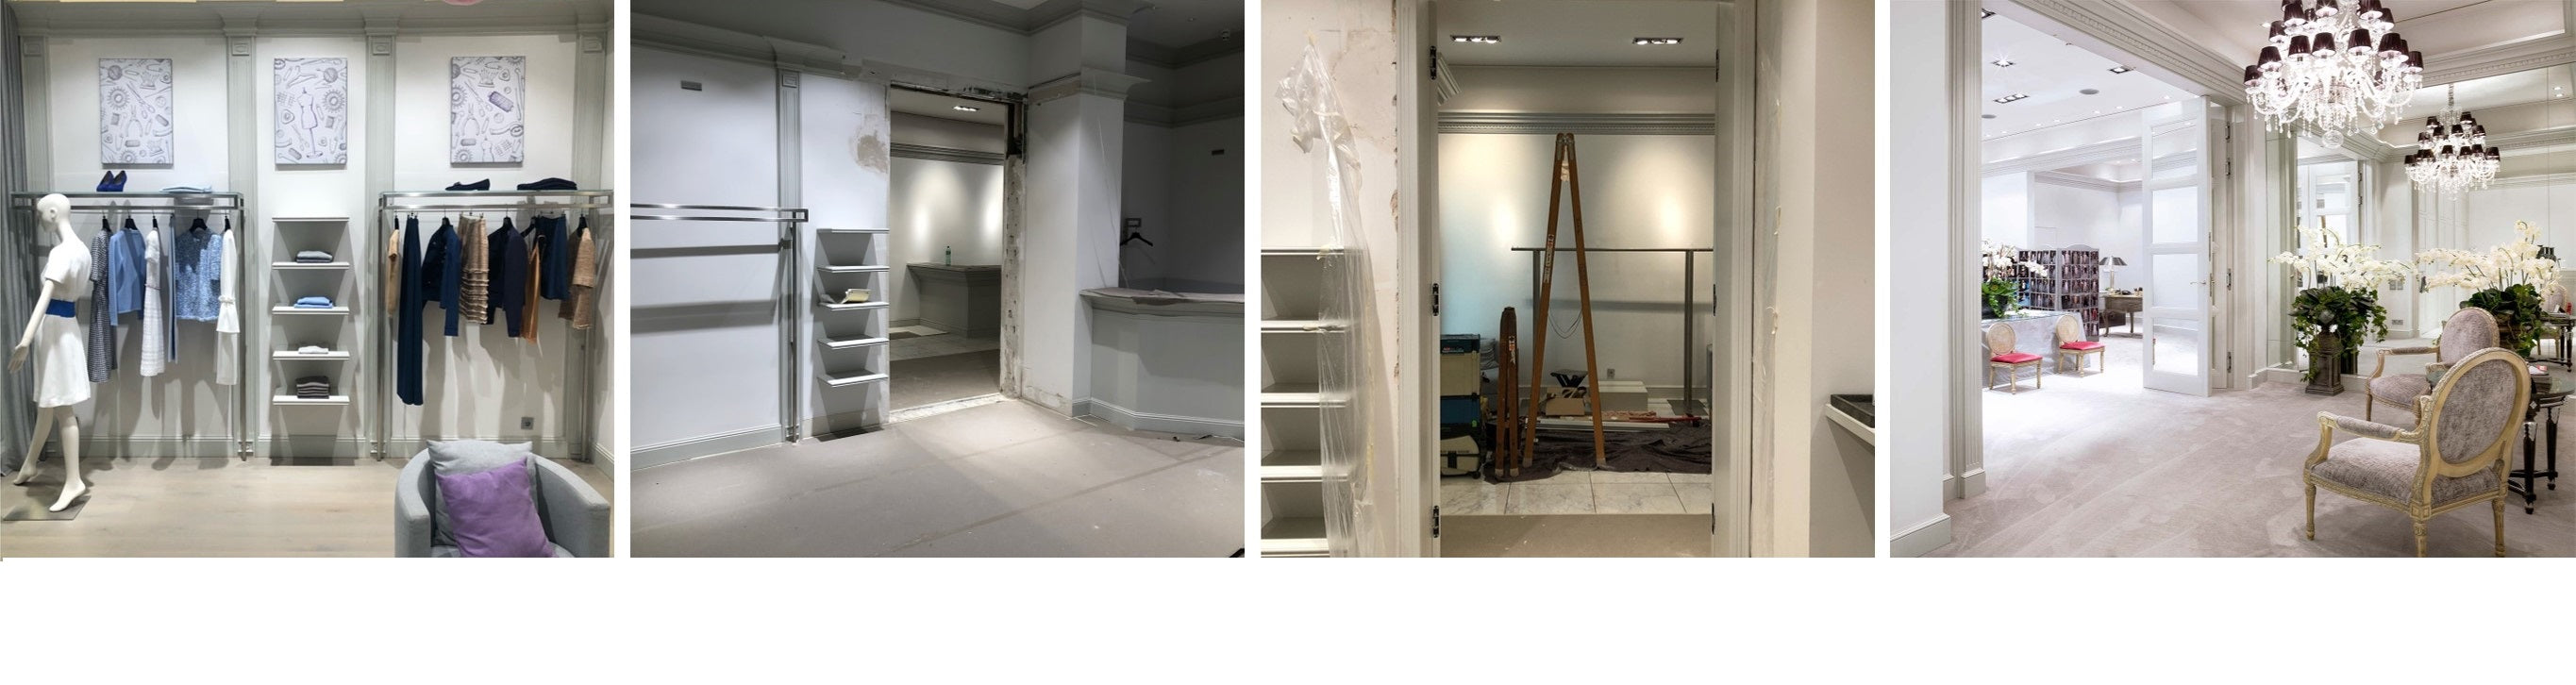 Renovation process of the Couture Salon and the PIO O'KAN store on Königsallee in Düsseldorf.